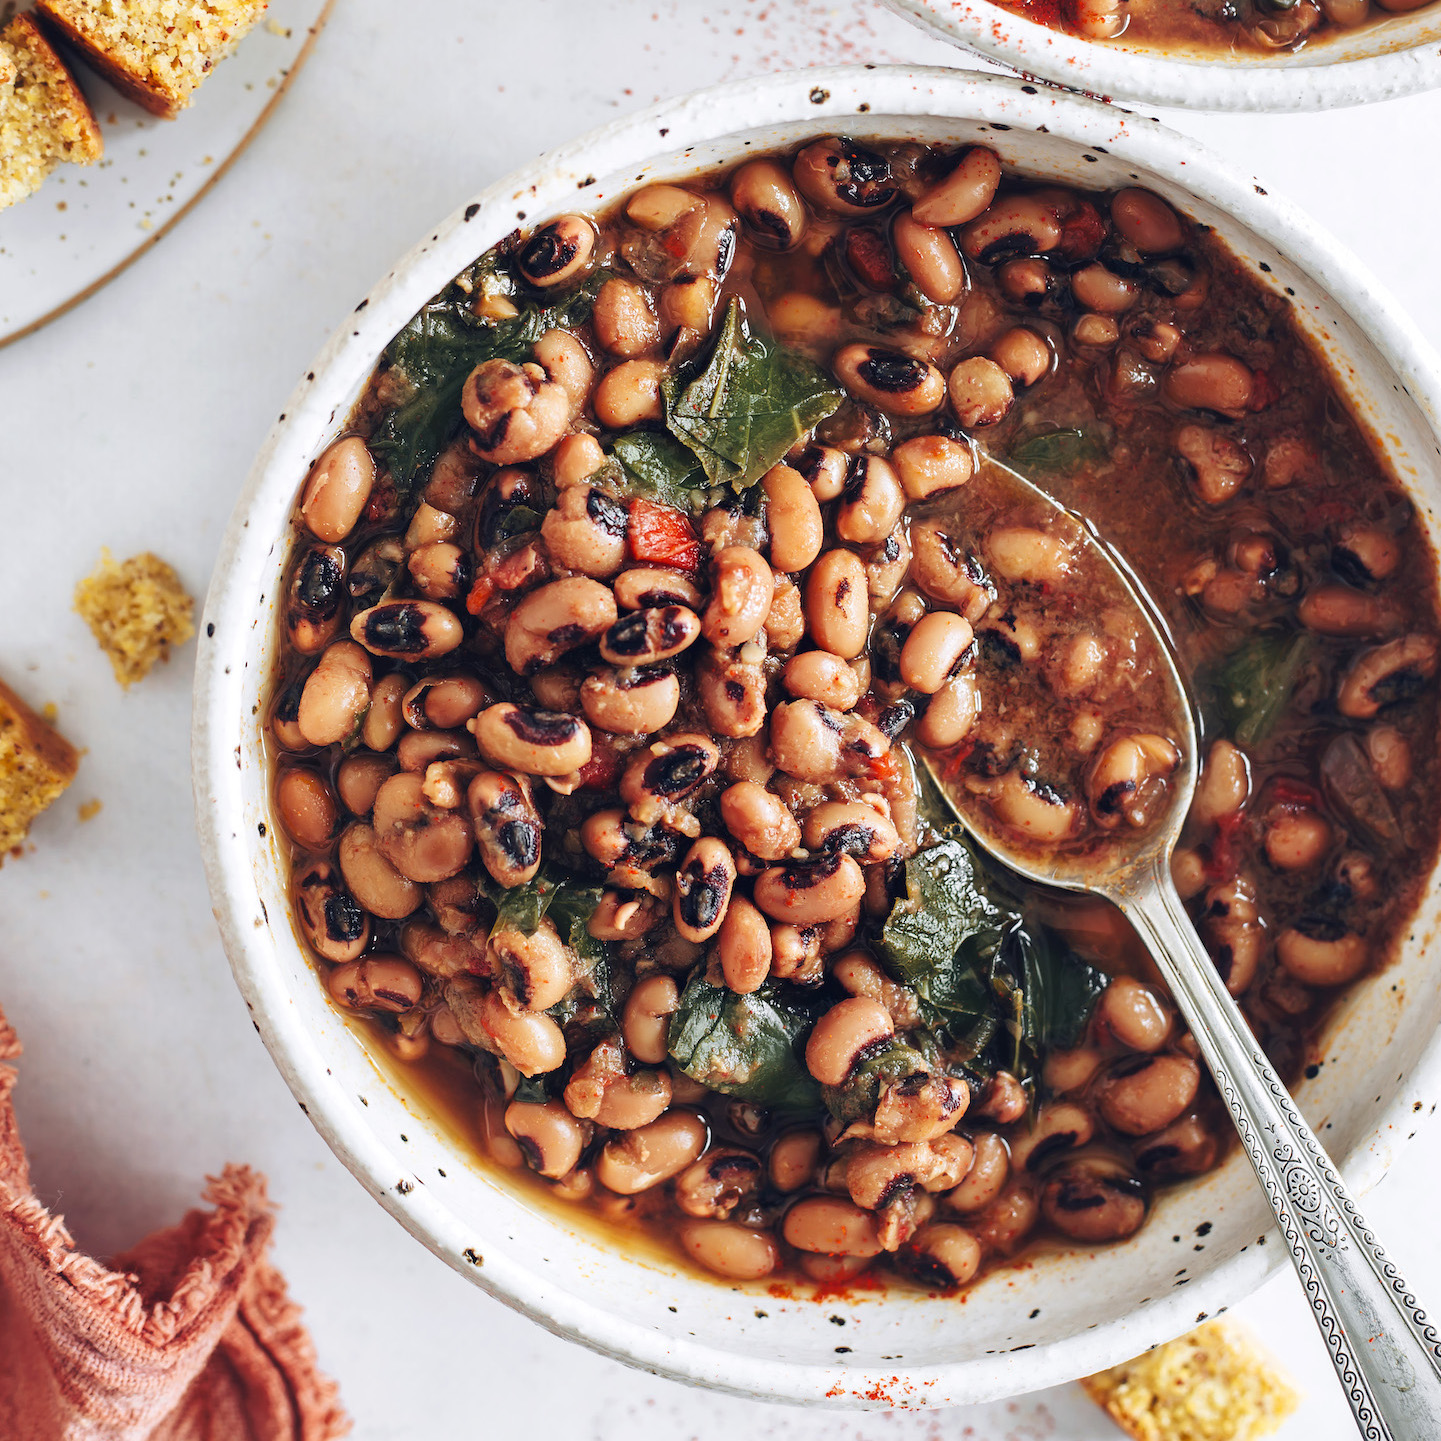 Are Black-Eyed Peas Good for You?